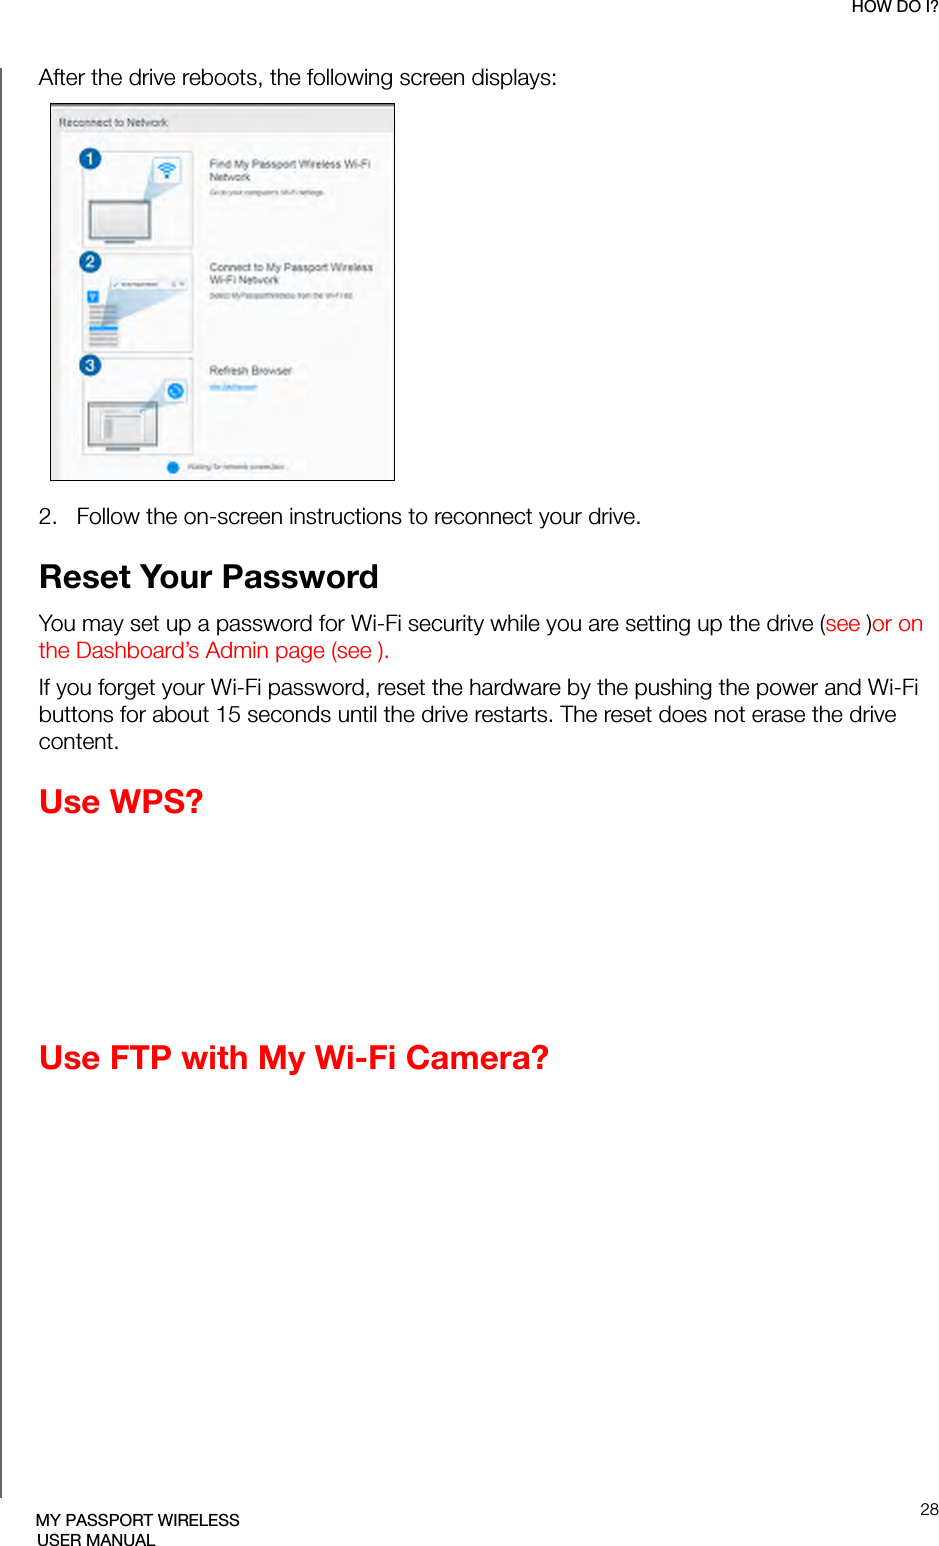 HOW DO I?28MY PASSPORT WIRELESSUSER MANUALAfter the drive reboots, the following screen displays:2.   Follow the on-screen instructions to reconnect your drive.Reset Your PasswordYou may set up a password for Wi-Fi security while you are setting up the drive (see )or on the Dashboard’s Admin page (see ). If you forget your Wi-Fi password, reset the hardware by the pushing the power and Wi-Fi buttons for about 15 seconds until the drive restarts. The reset does not erase the drive content.Use WPS?Use FTP with My Wi-Fi Camera?